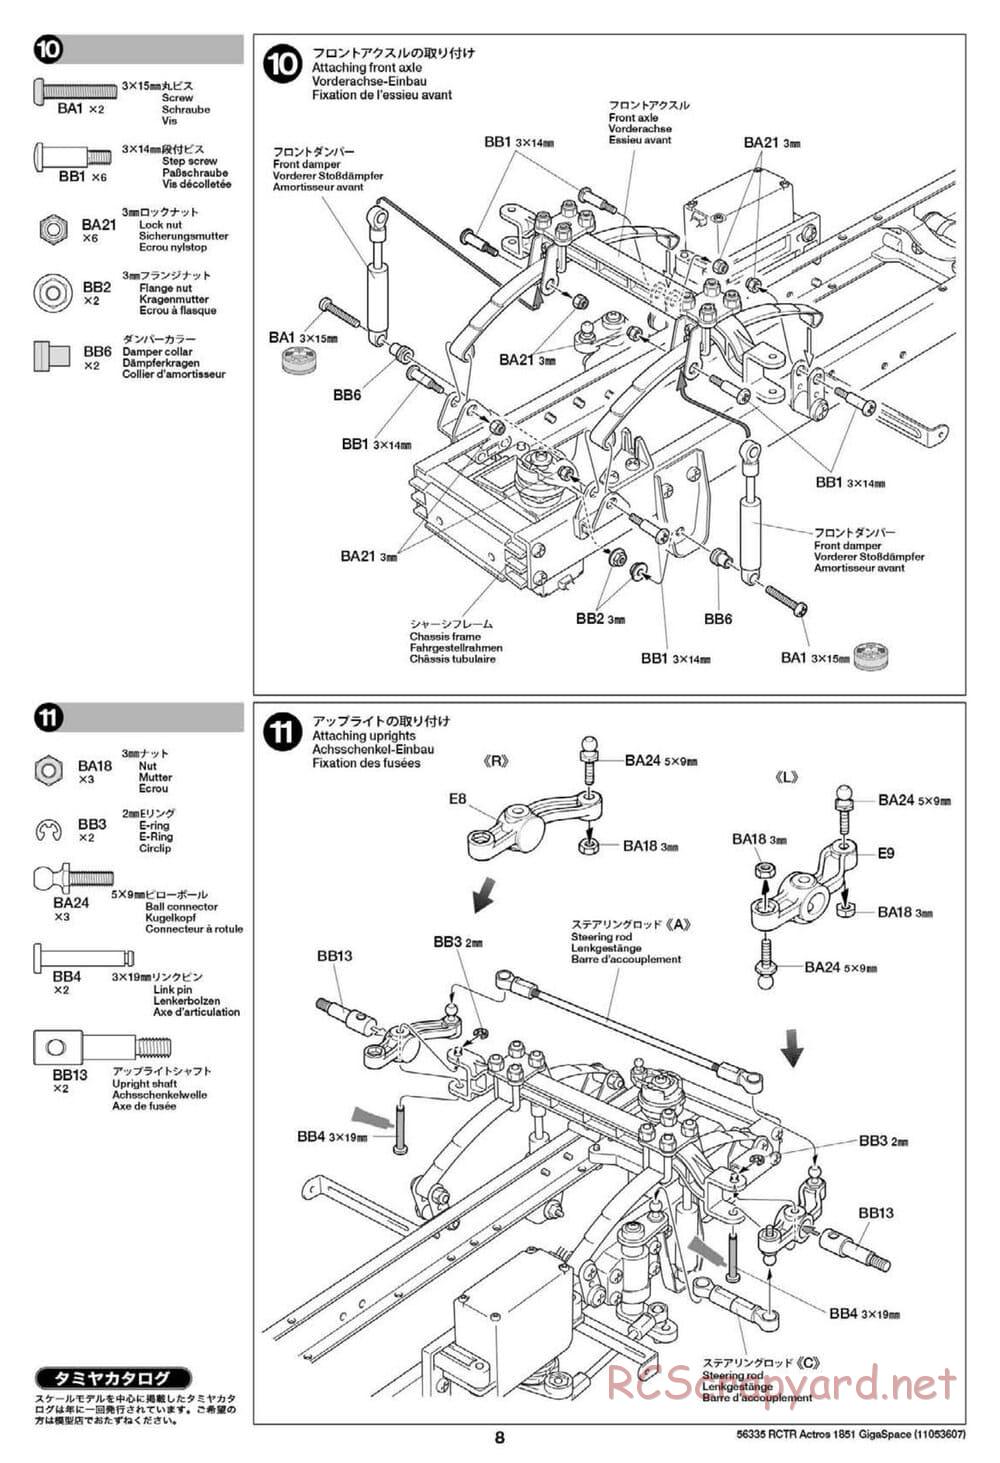 Tamiya - Mercedes-Benz Actros 1851 Gigaspace Tractor Truck Chassis - Manual - Page 8